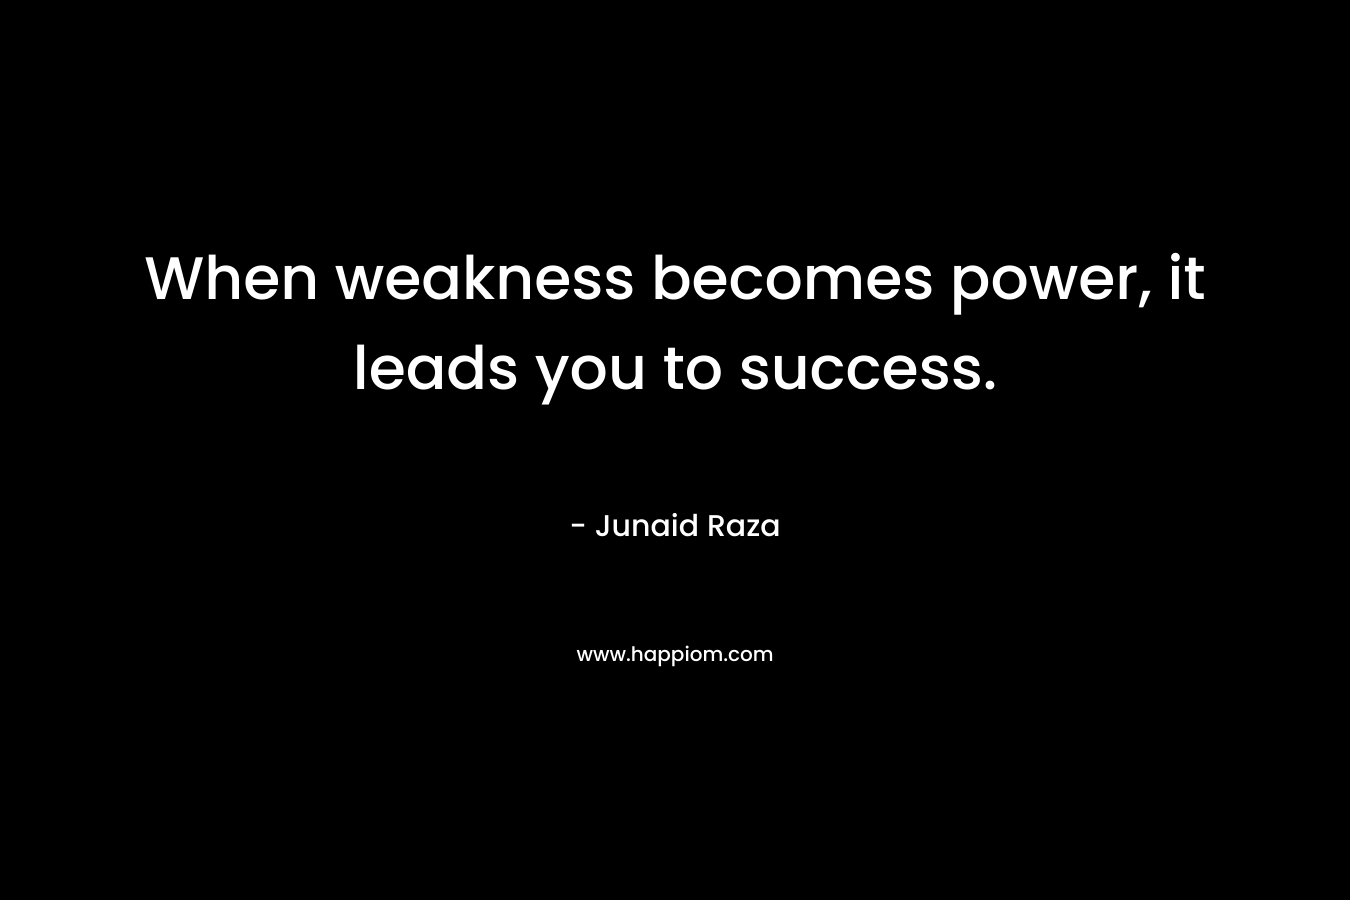 When weakness becomes power, it leads you to success.